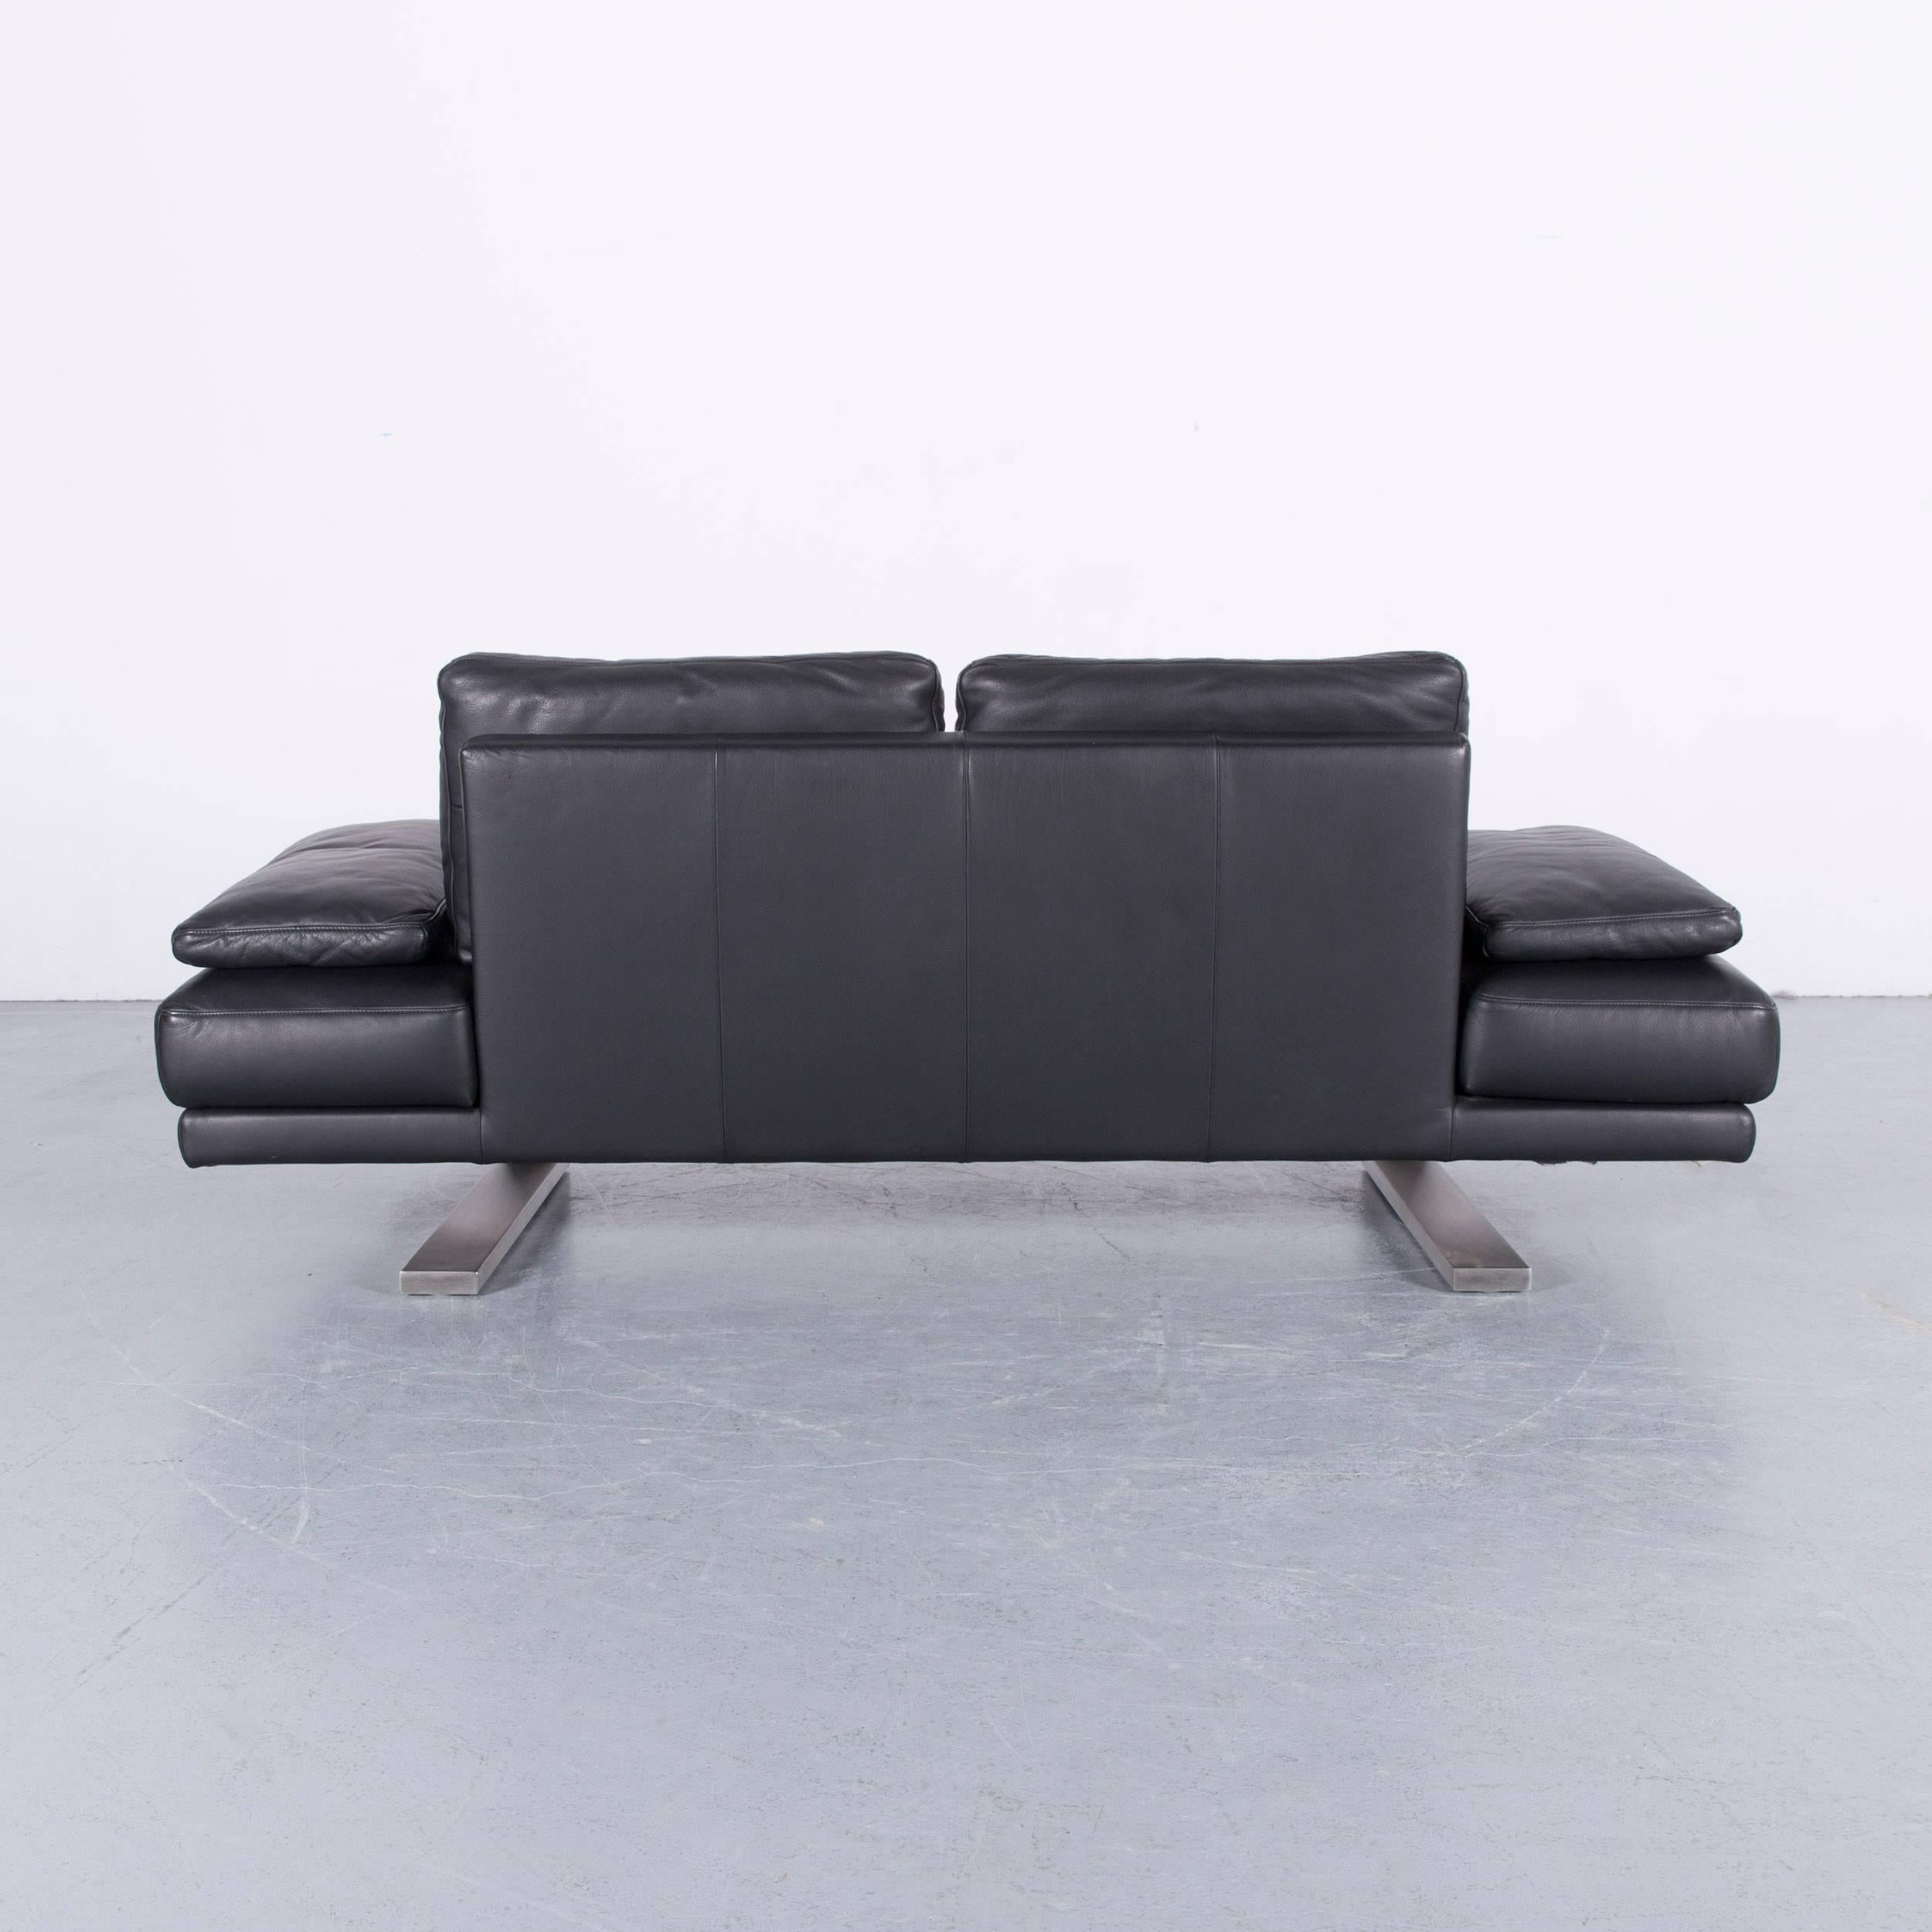 Rolf Benz 6600 Designer Leather Sofa in Black Two-Seat 5